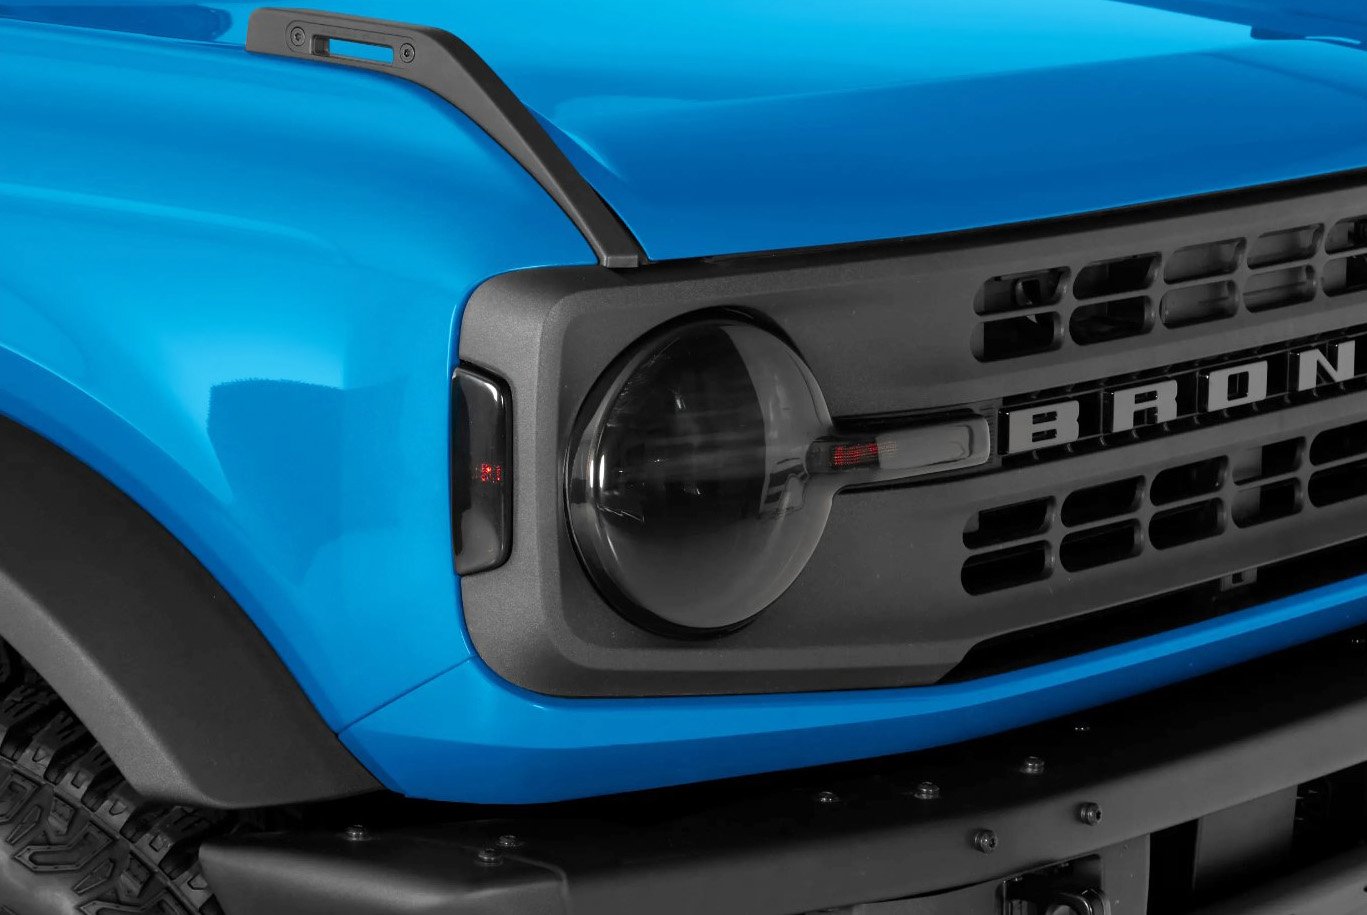 Smoked Headlight Cover Kit Fits Gen 6 Ford